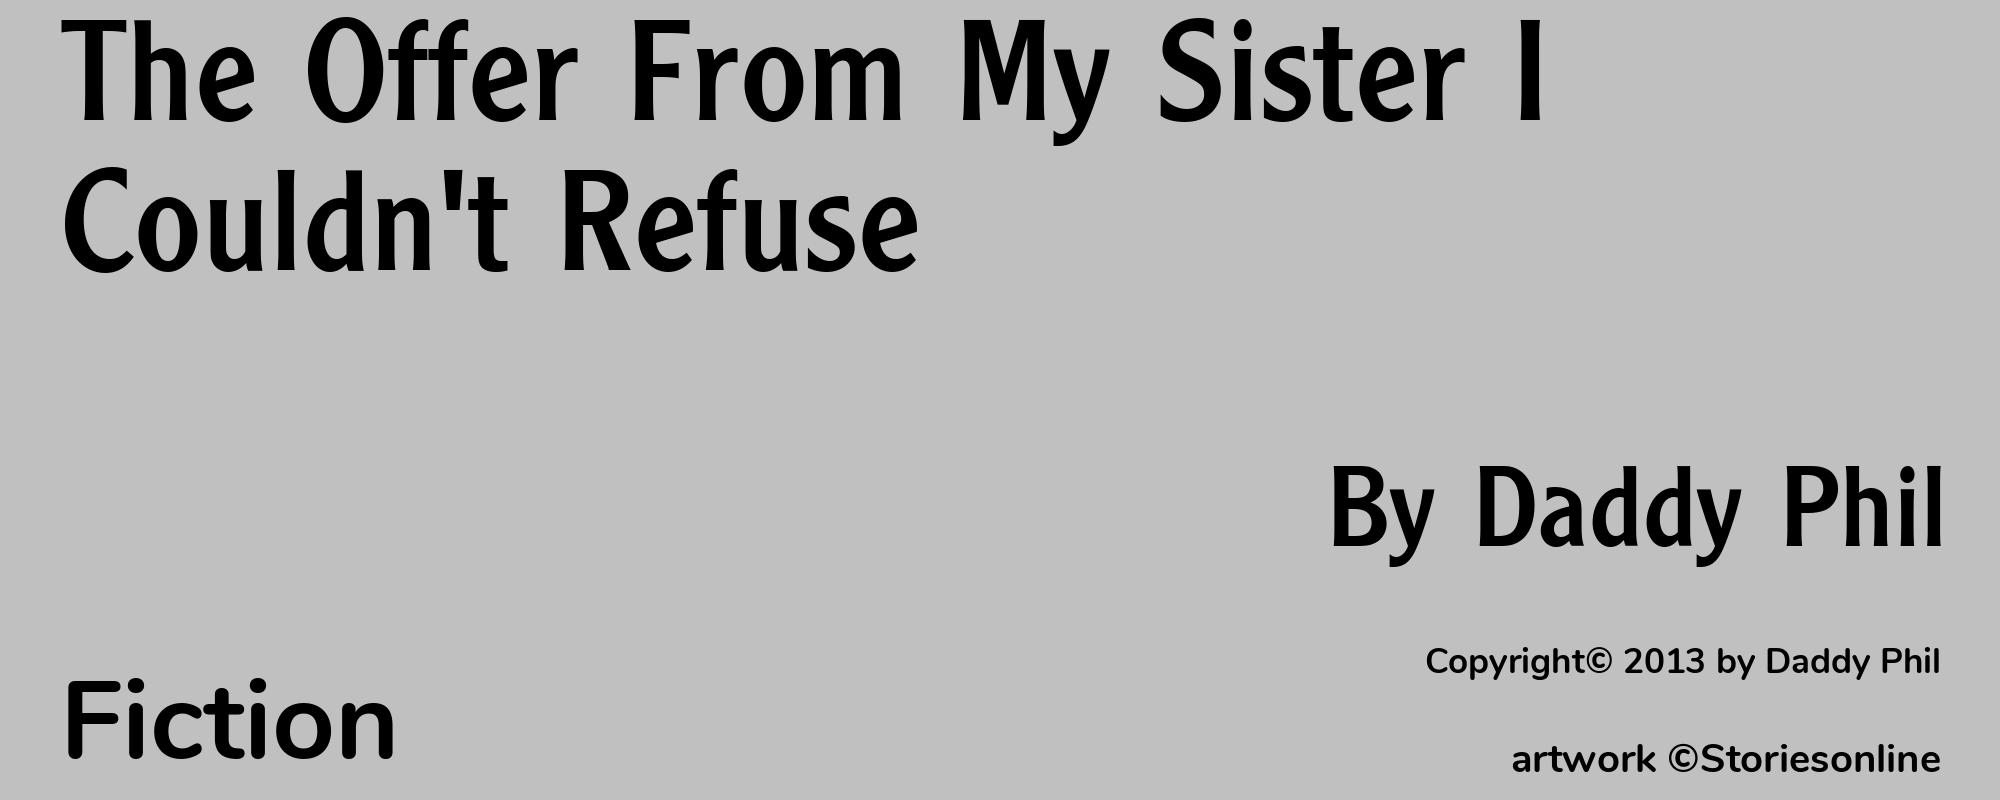 The Offer From My Sister I Couldn't Refuse - Cover